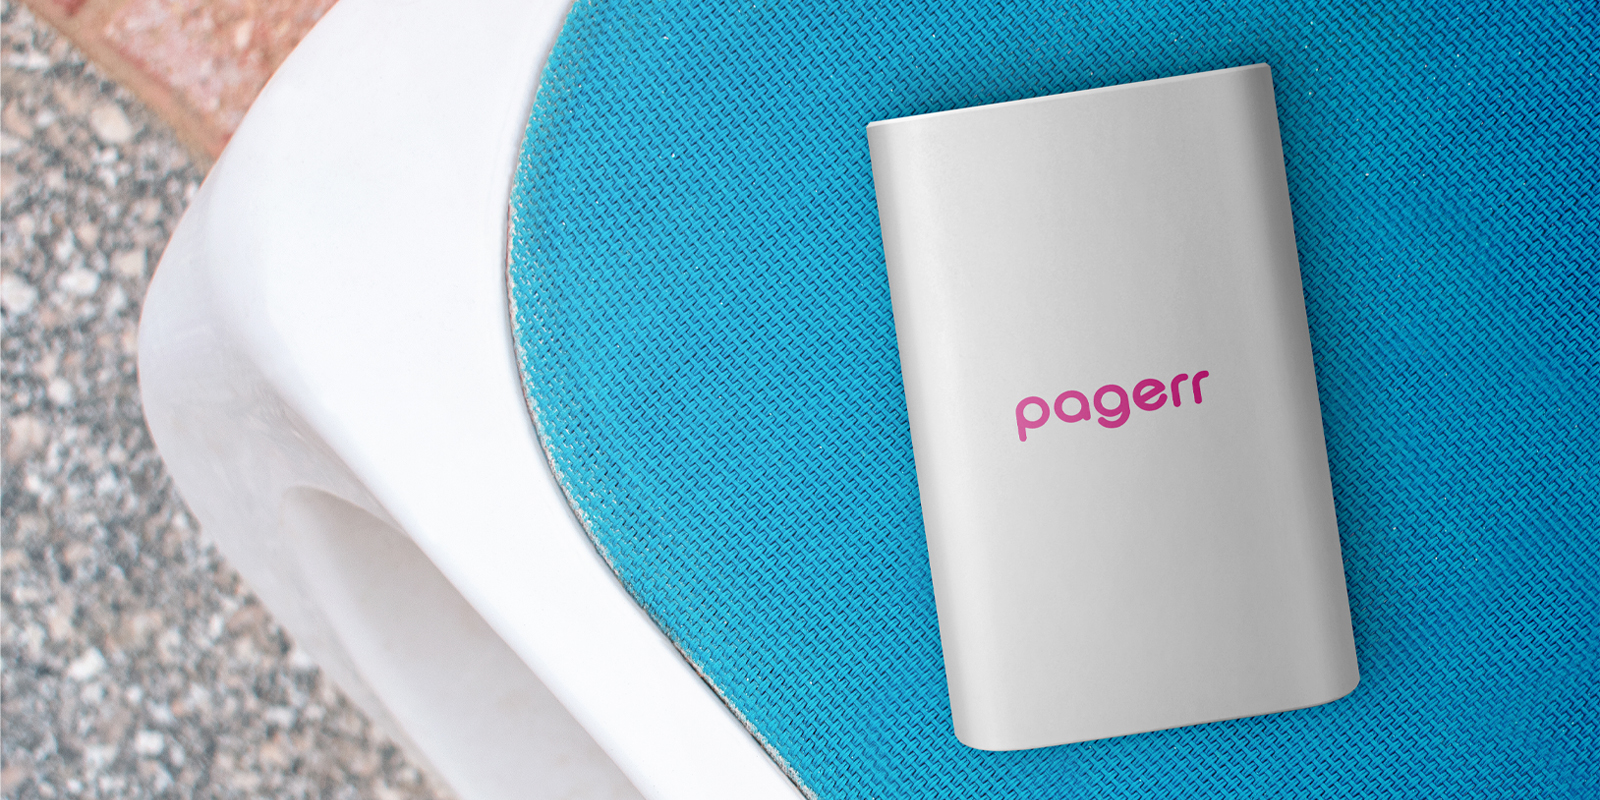 Chargers & power banks in Valencia - Print with Pagerr